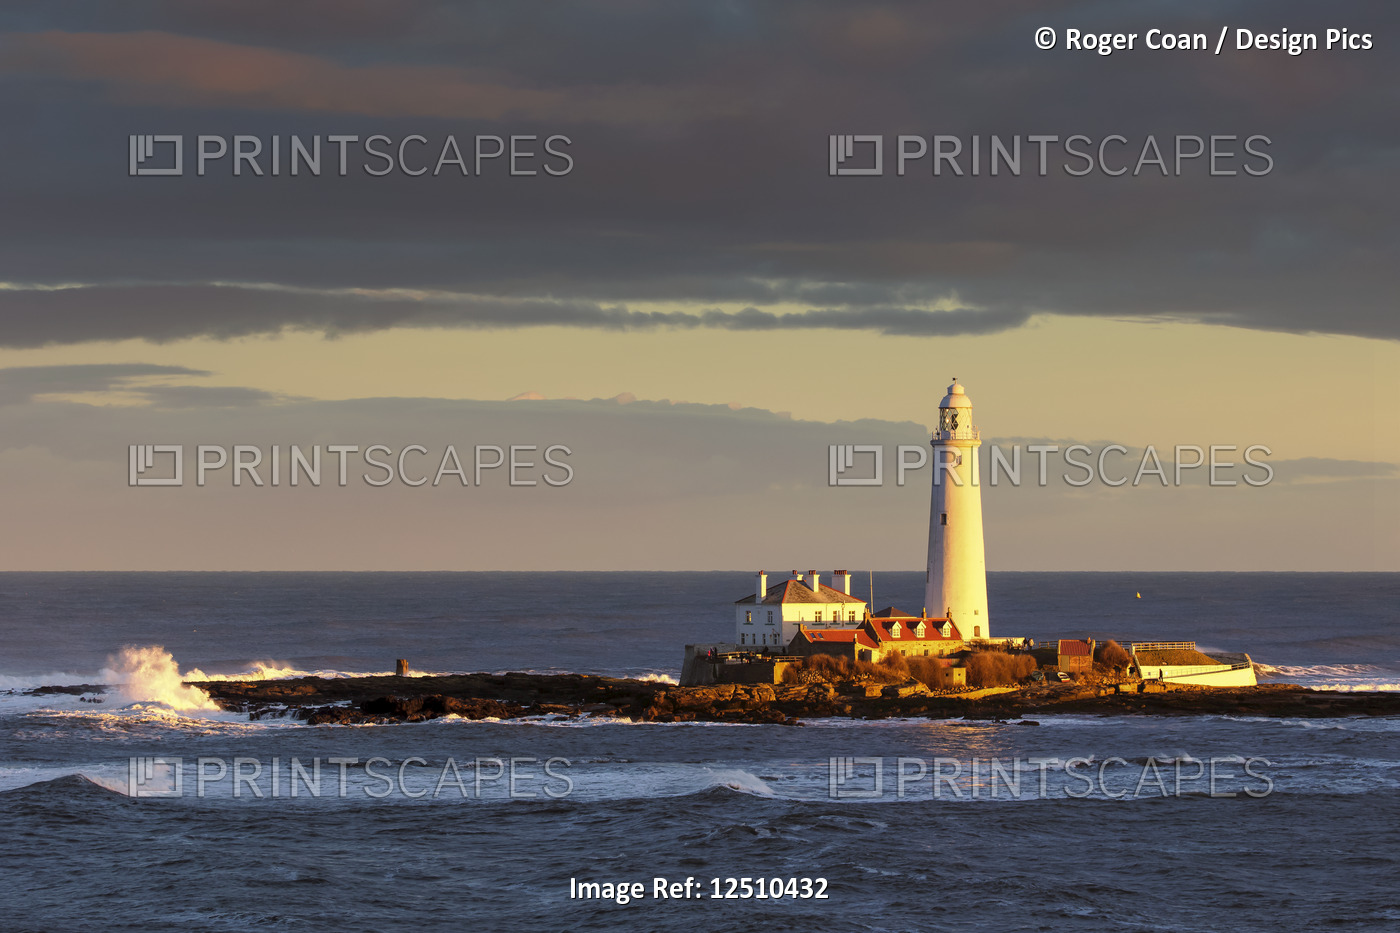 St. Mary's Lighthouse on St. Mary's Island, Whitley Bay Whitley Bay, Tyne and ...